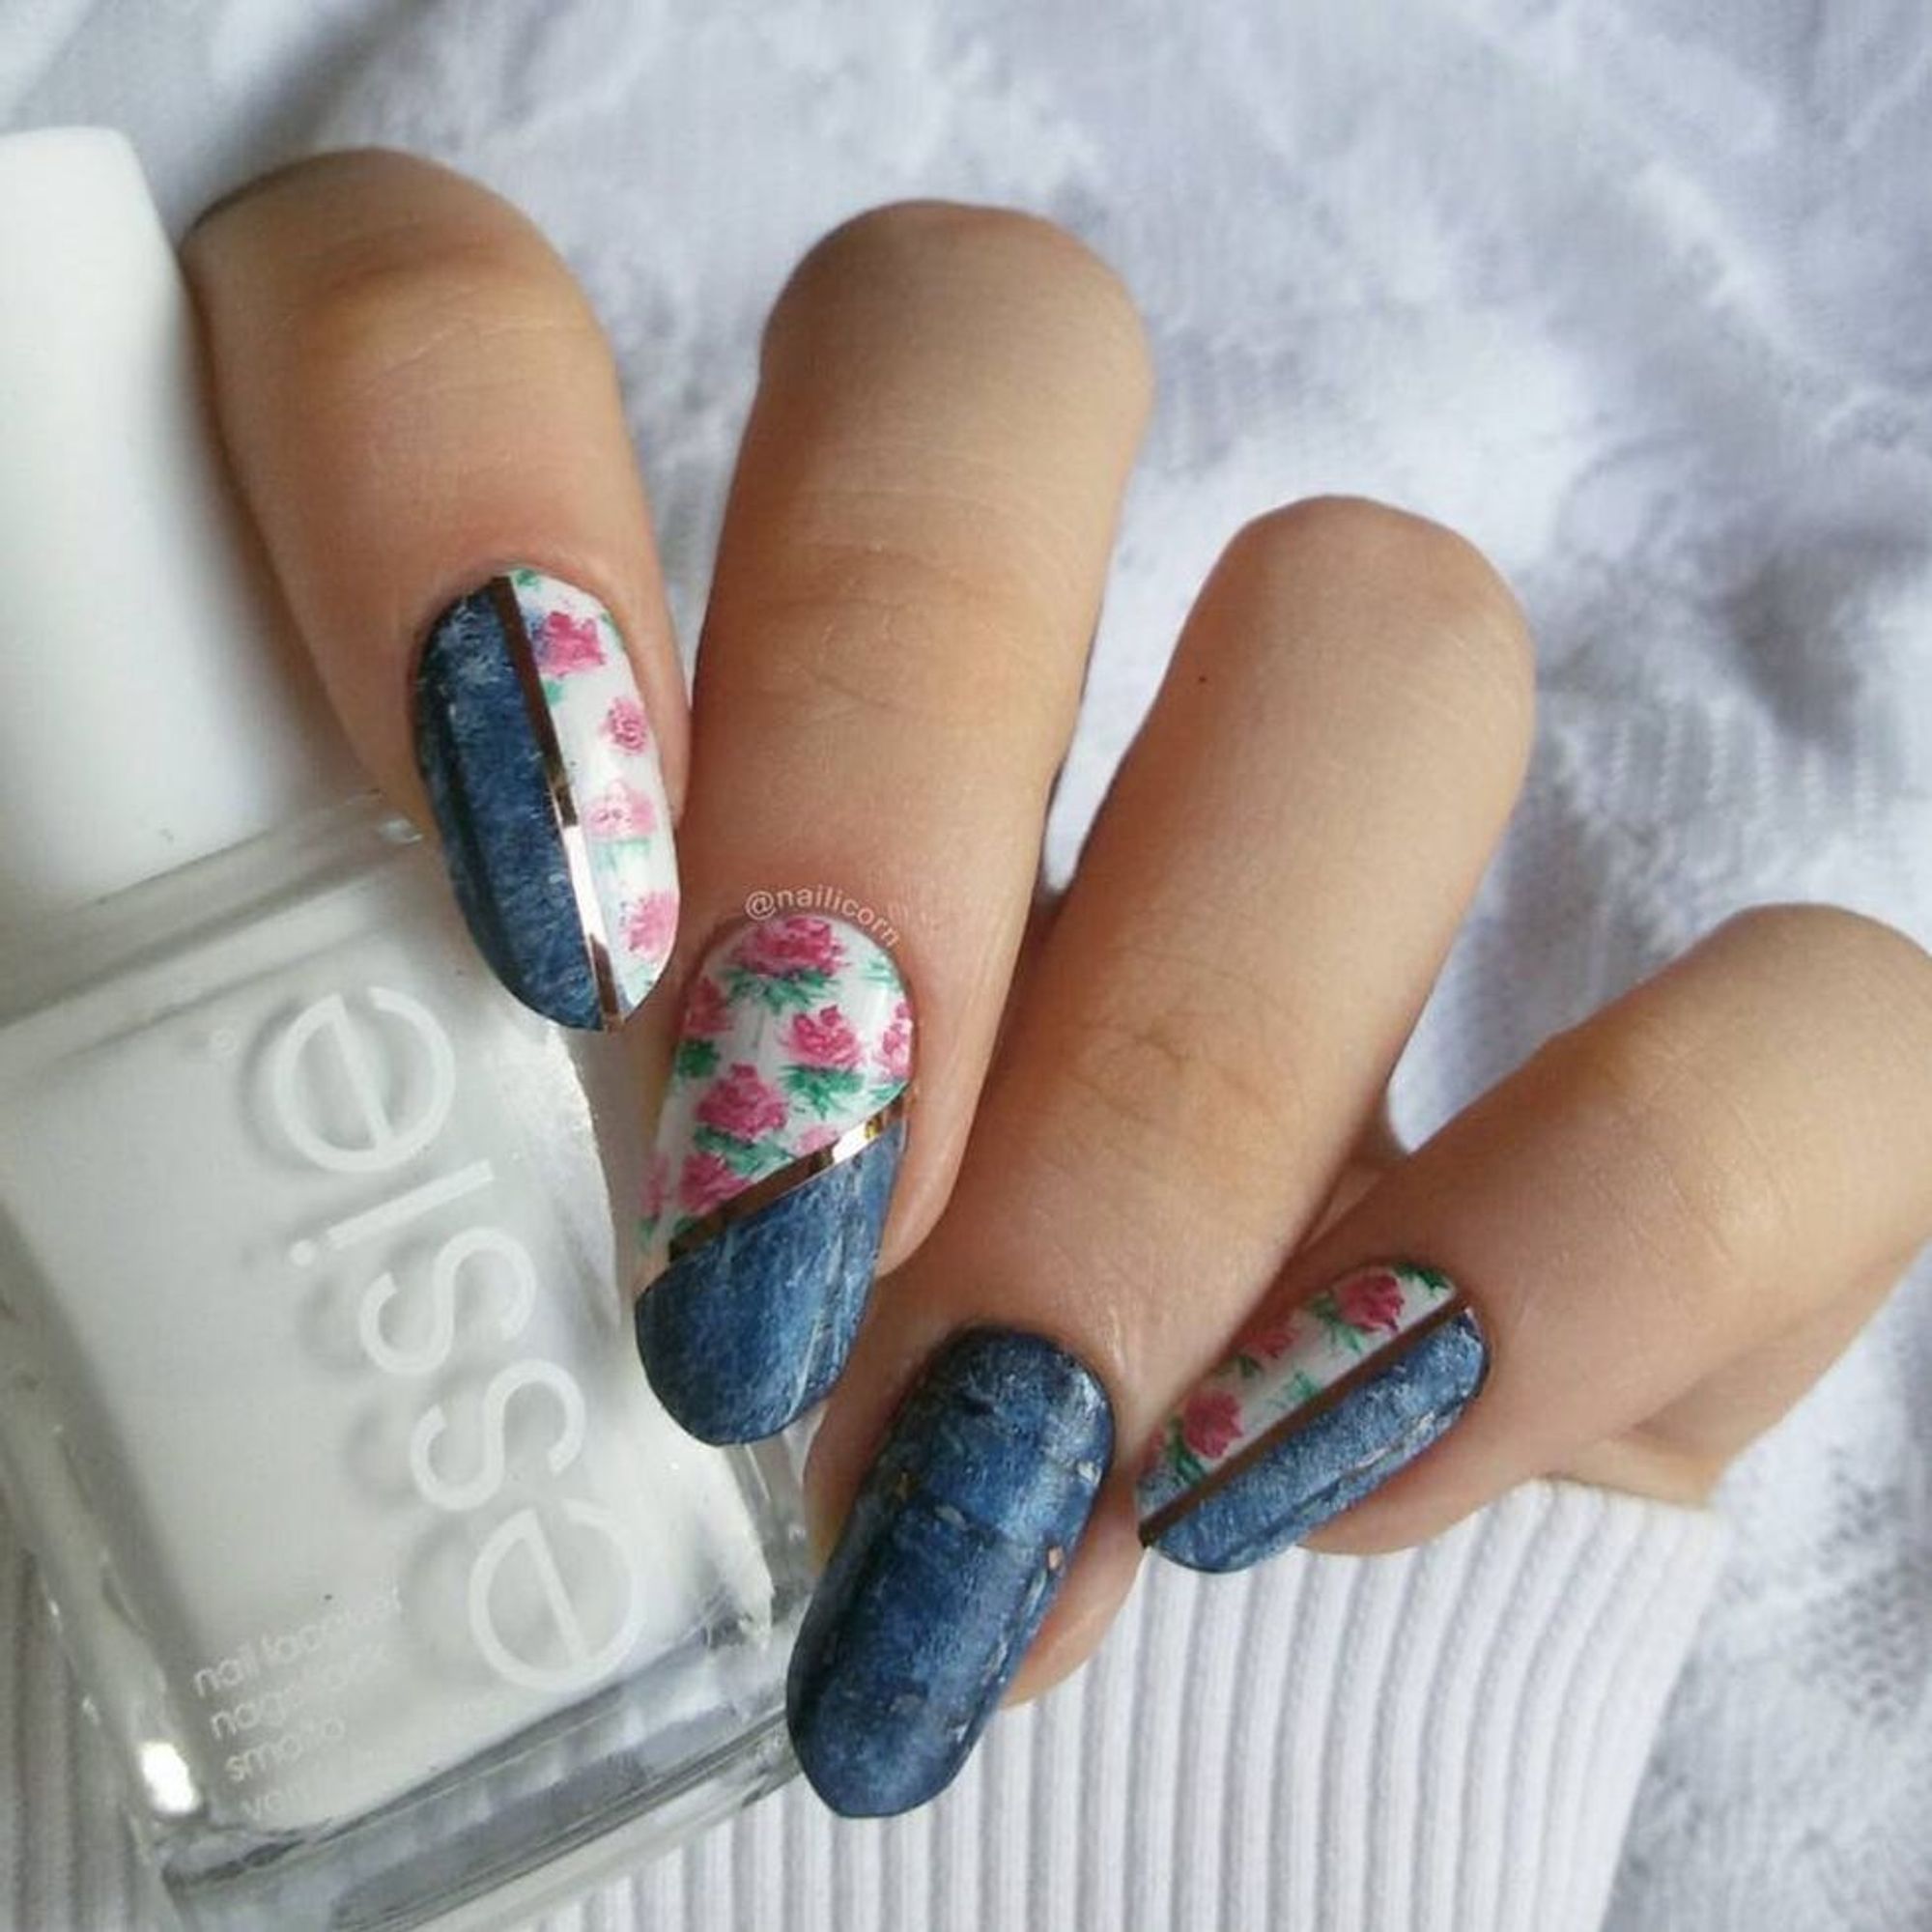 Denim Nails Are the Latest Mani Trend Blowing Up Your Instagram Feed ...